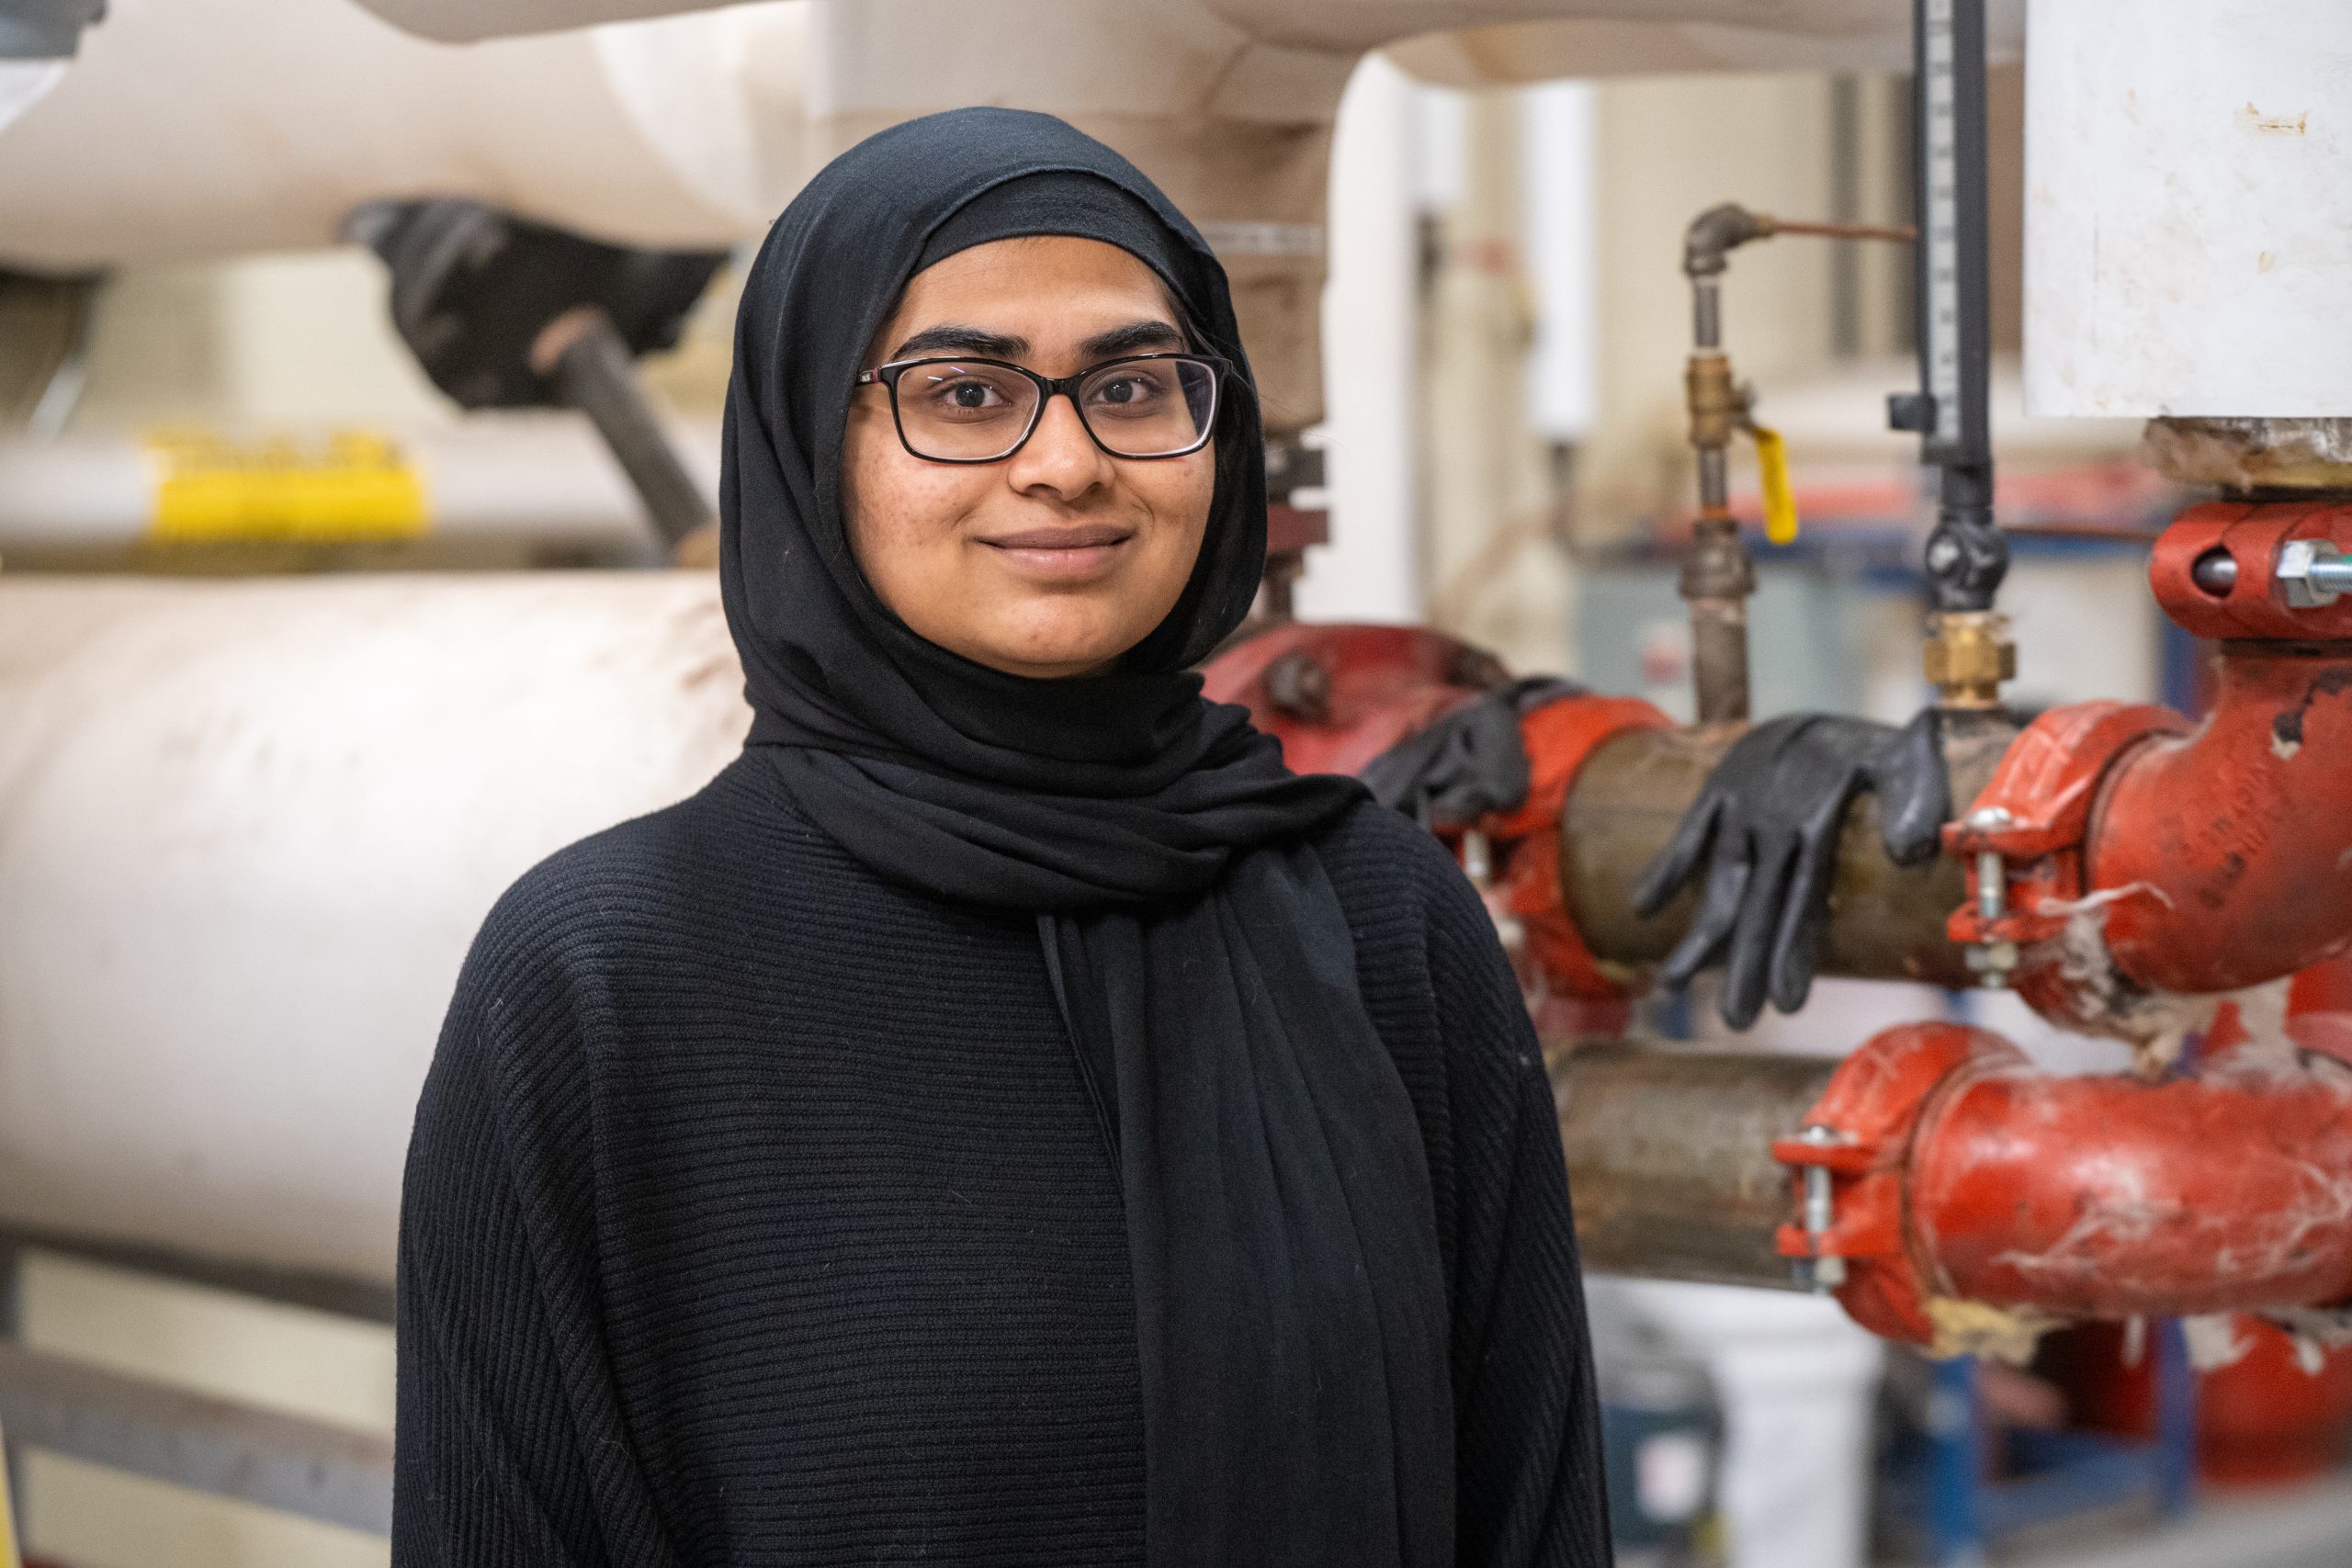 Fatima Hassan pictured on-site at U of T’s Central Steam Plant 